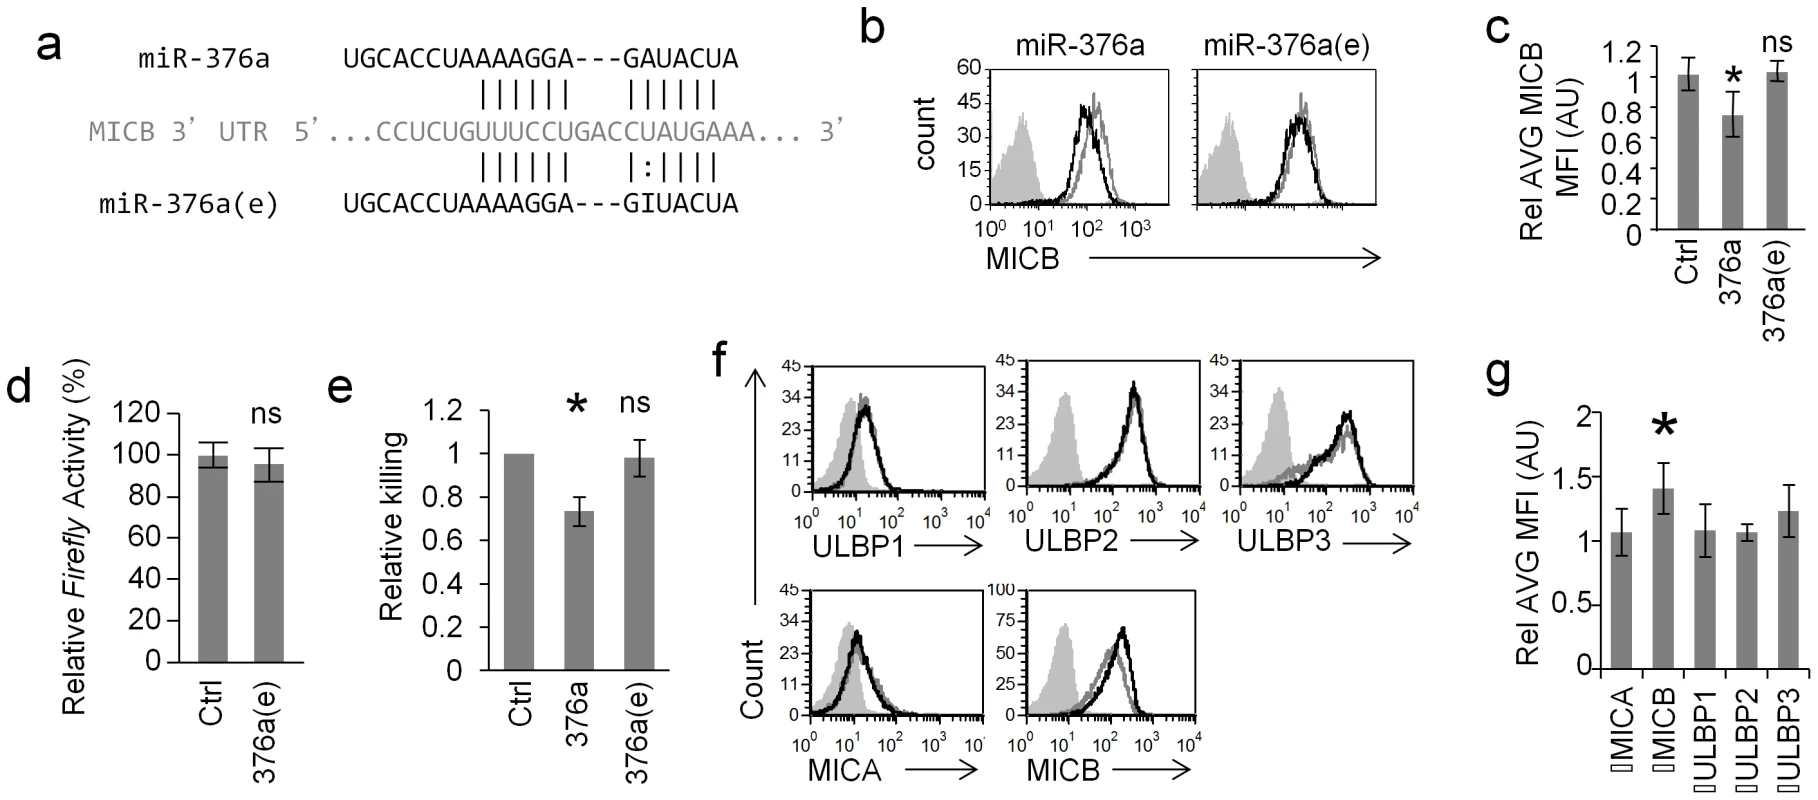 RNA editing of miR-376a abolishes its regulation of MICB.